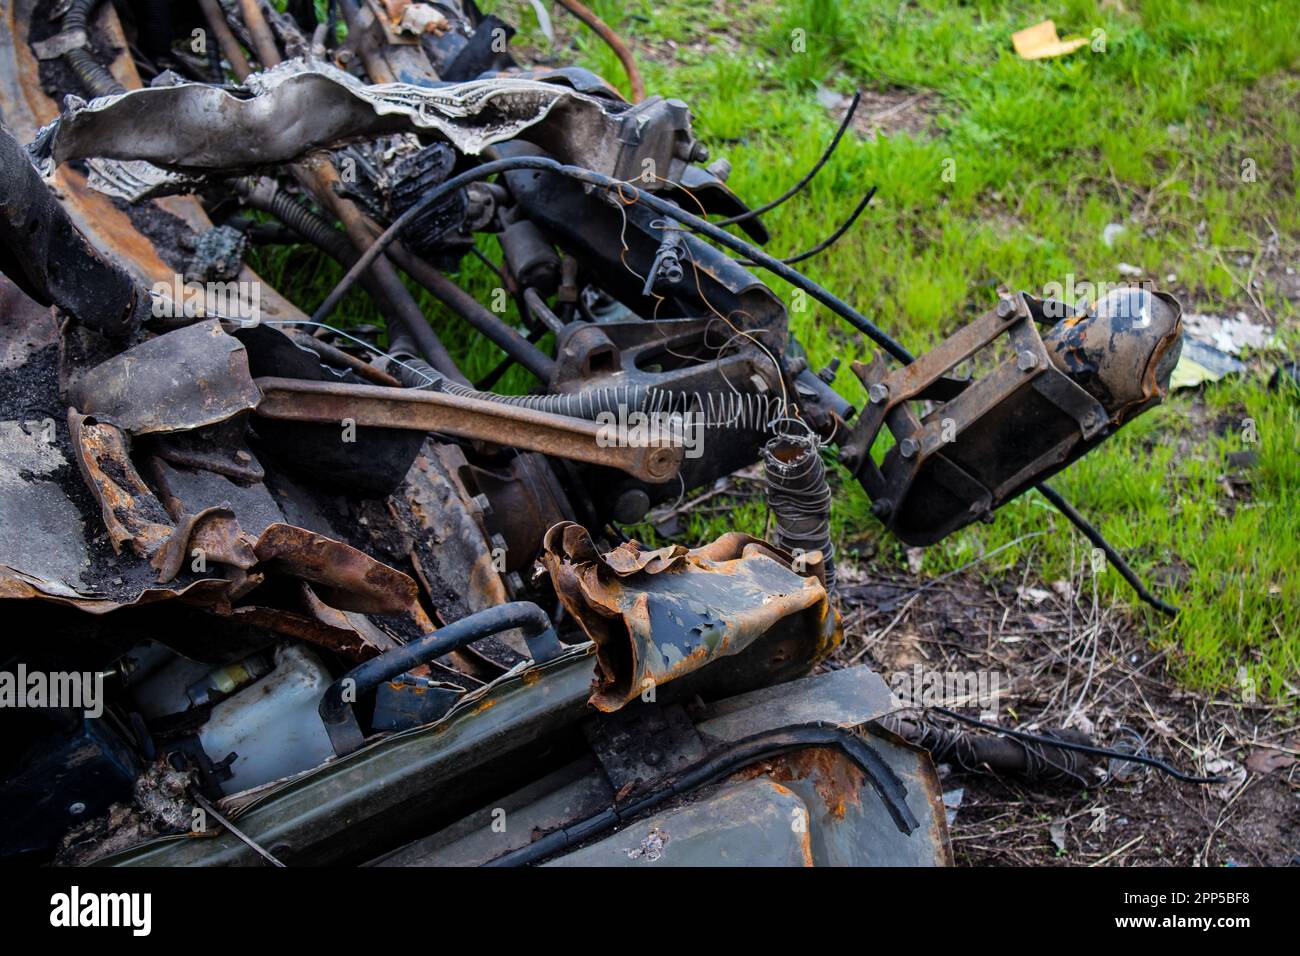 Aftermath of a mine explosion. The car is totally destroyed and debris is strewn all around. A large number of defensive and attack explosives are use Stock Photo